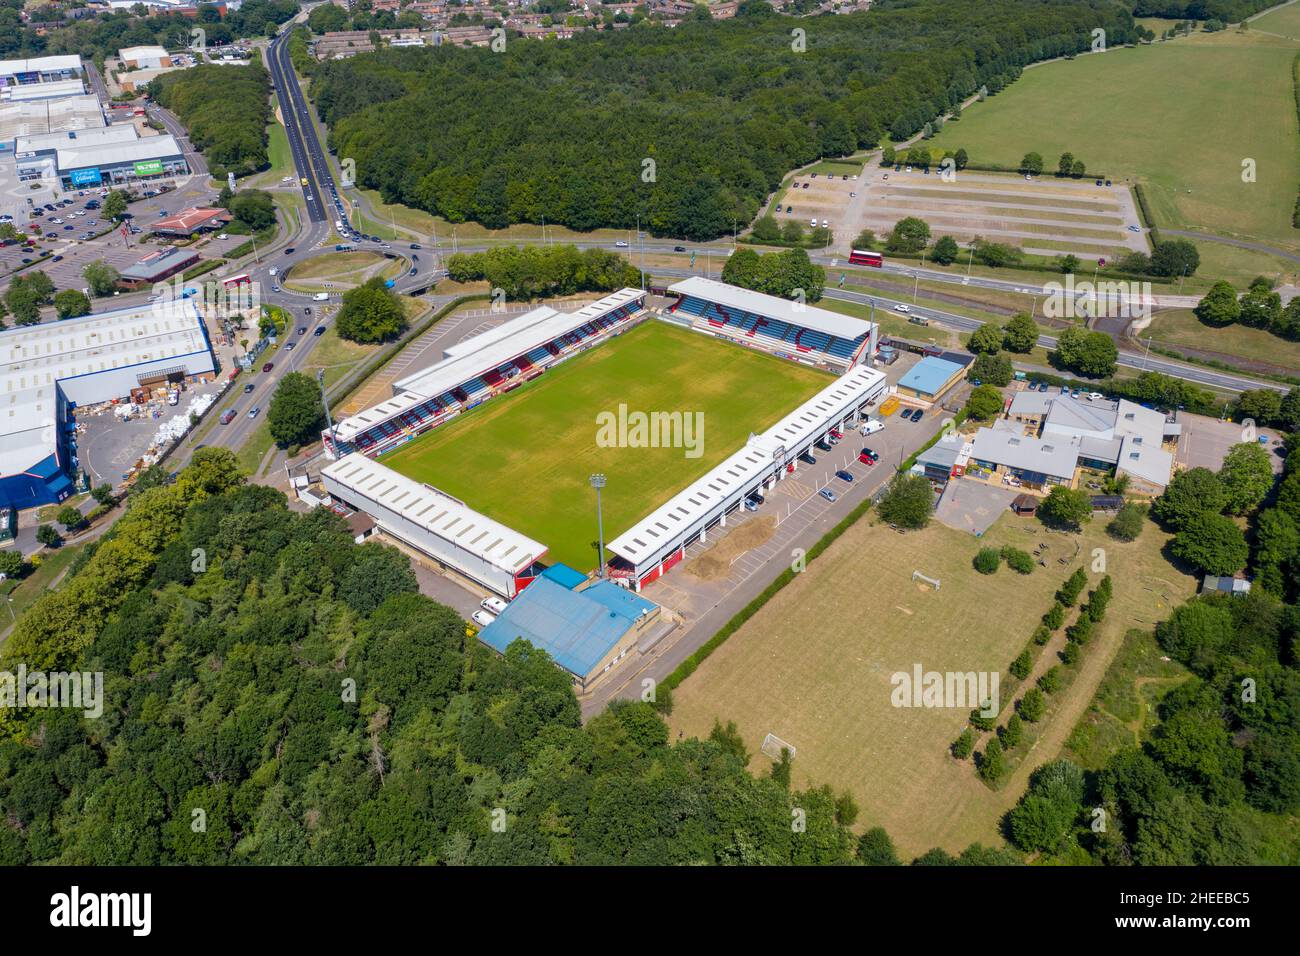 Aerial photo of the Stevenage Football Club a professional association football club based in the town of Stevenage, Hertfordshire, England on a sunny Stock Photo